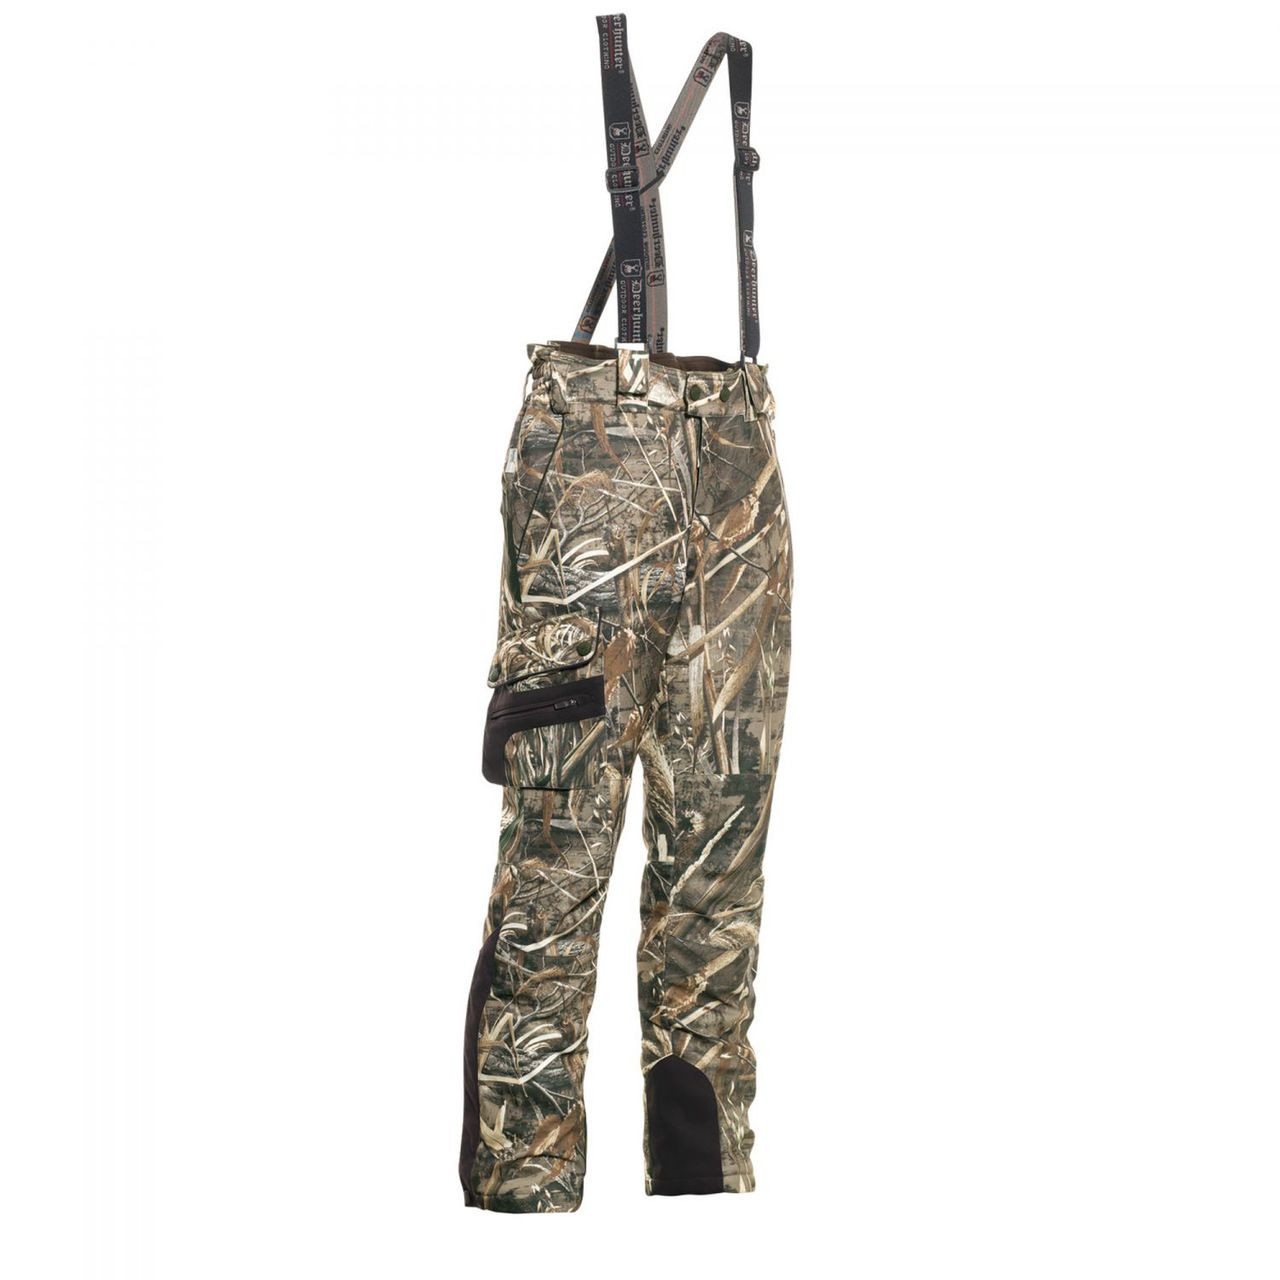 Muflon Light Trousers  Muflon Light are water resistant Deerhunter trousers  with stretch and membrane Muflon Light hunting trousers are especially  suitable for hunting in  By Deerhunter  Facebook